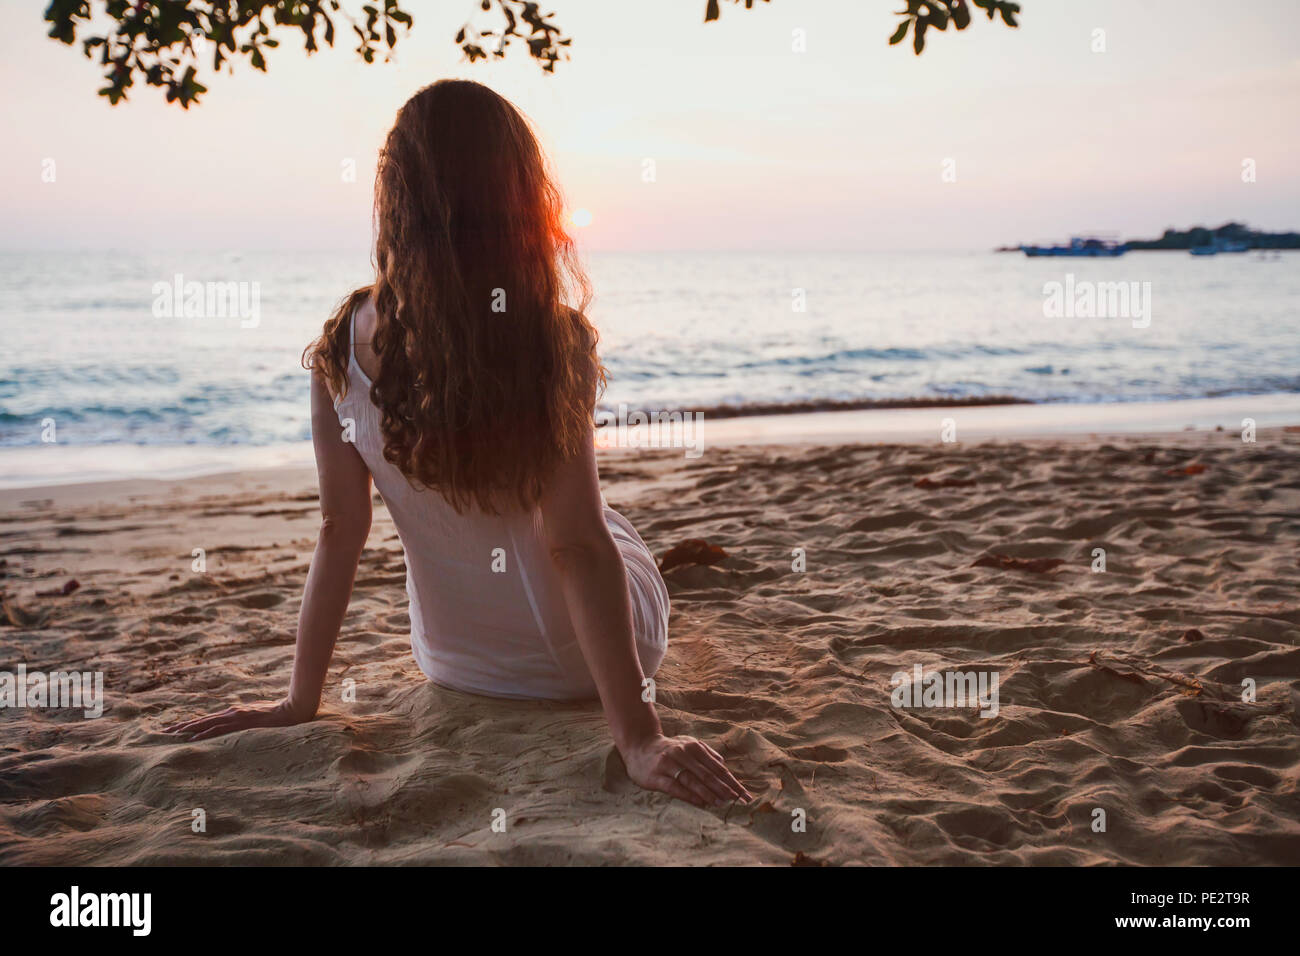 romantic dreams, beautiful girl sitting alone on calm quiet sunset beach, relaxation Stock Photo